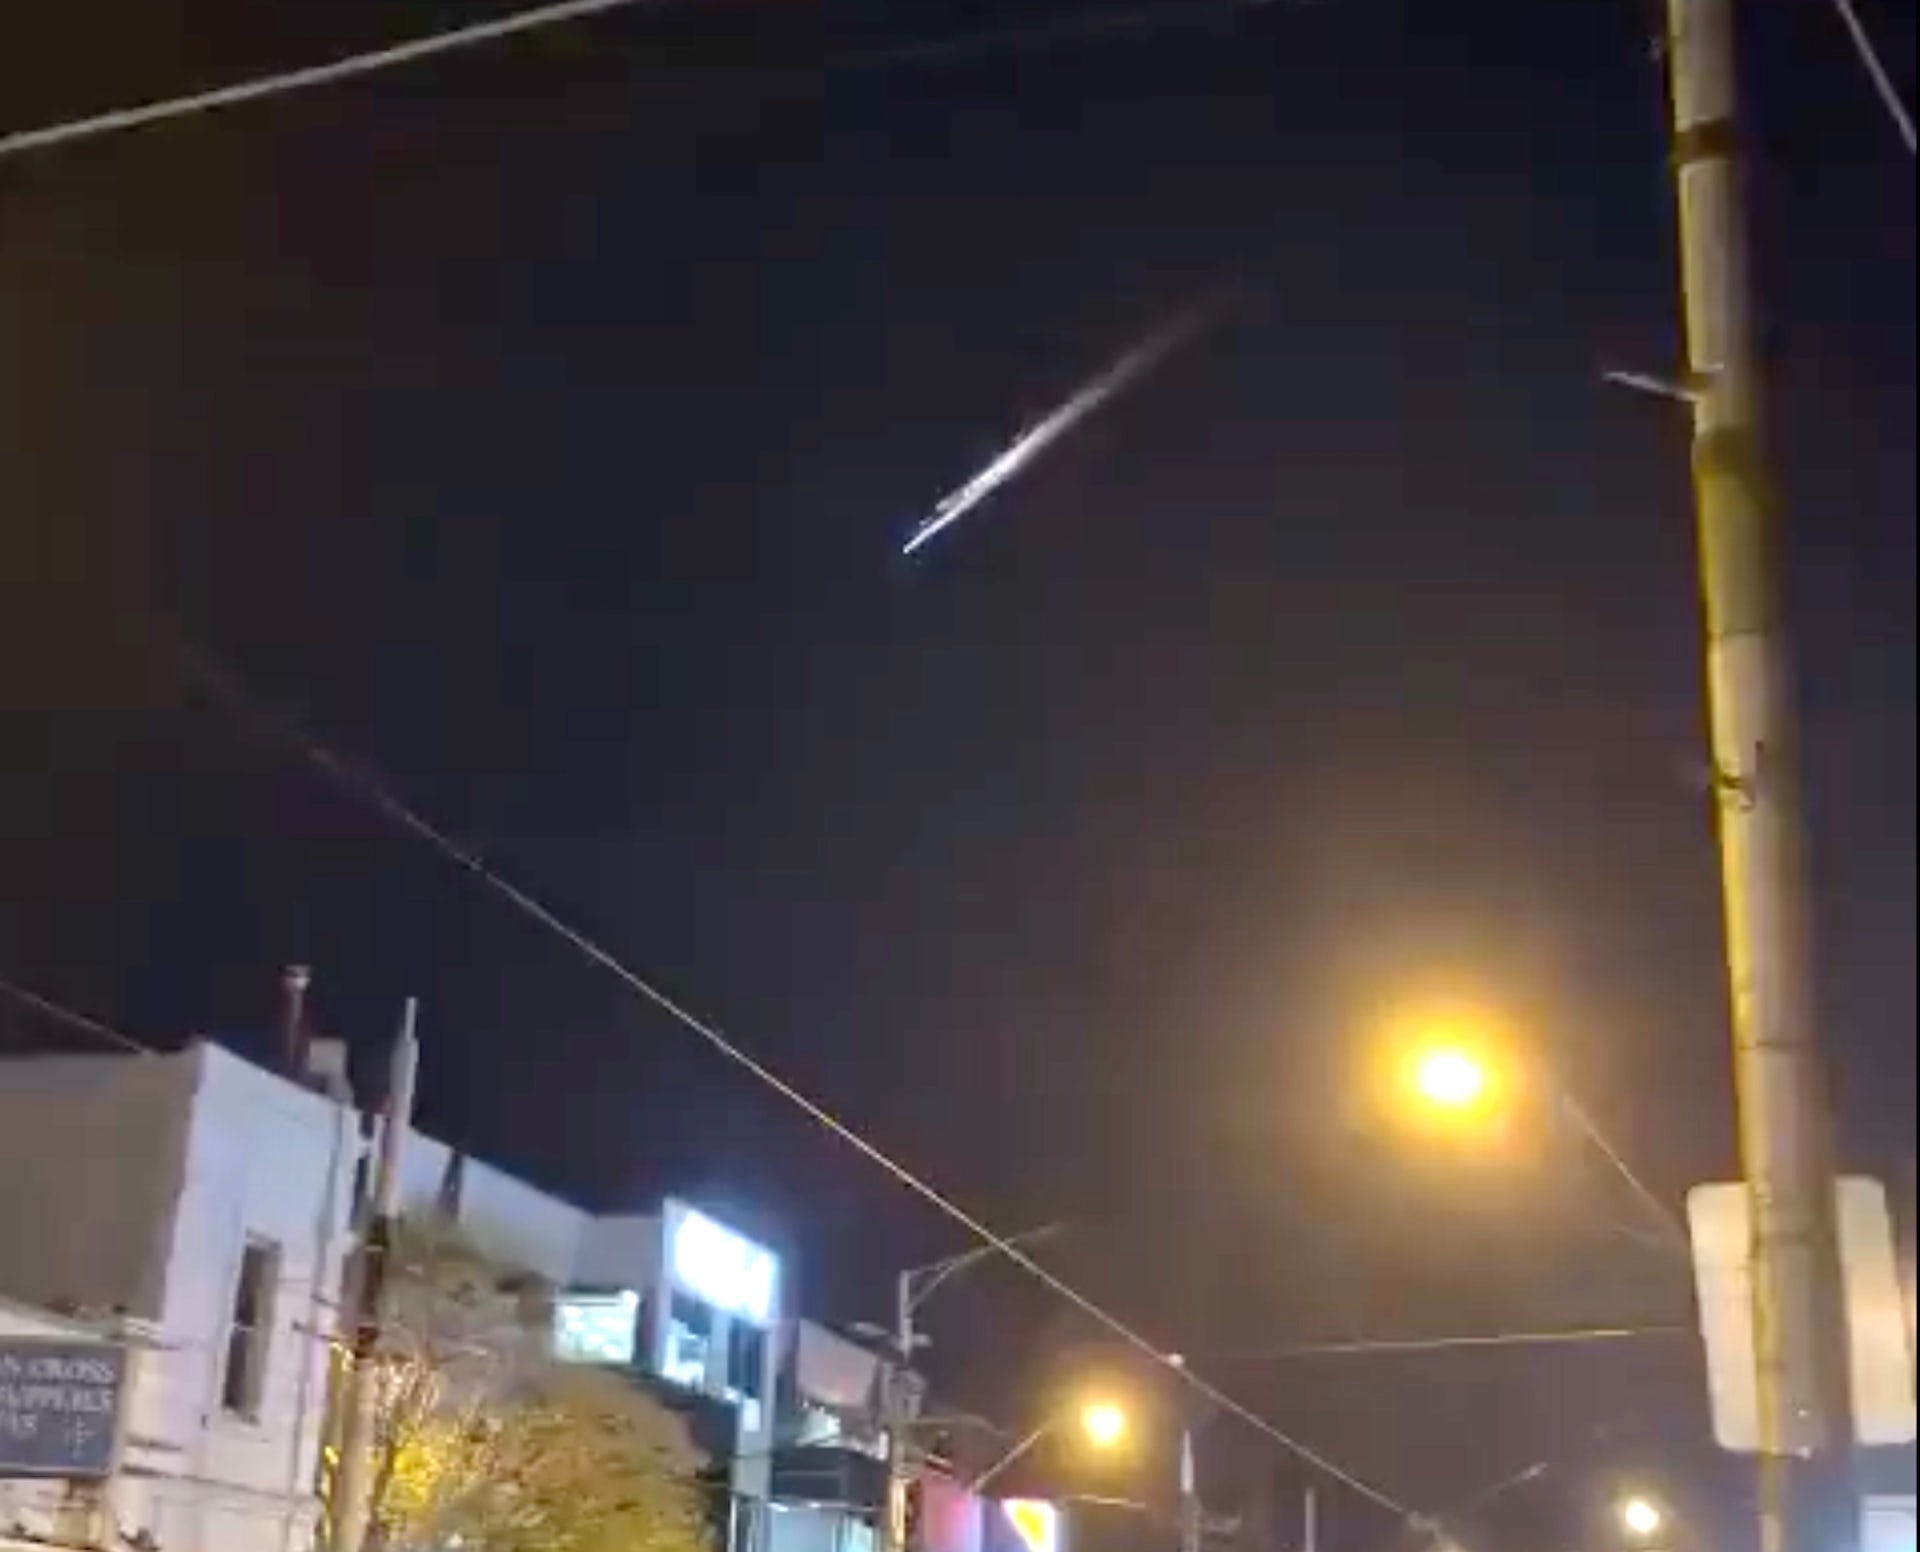 A mesmerizing fireball unexpectedly lights up Melbourne's sky, catching astronomers off guard.